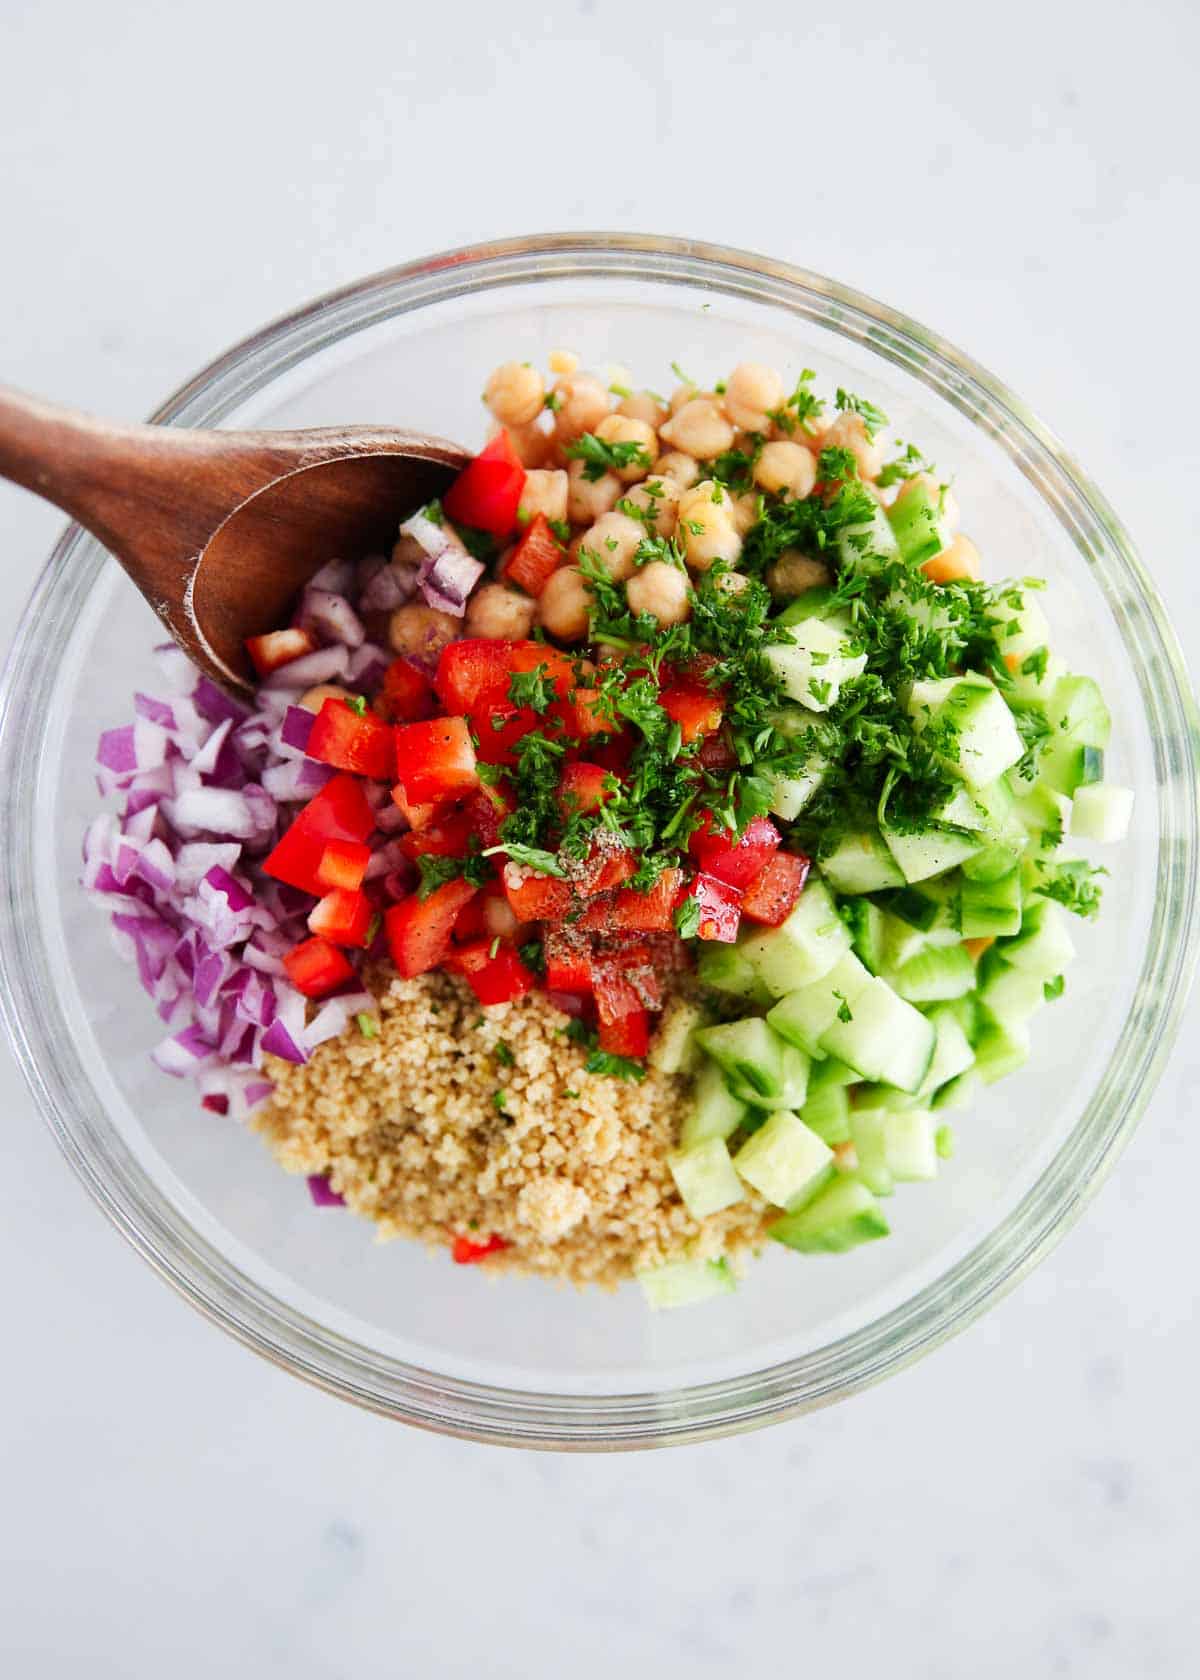 Showing how to make couscous salad in a glass bowl. 